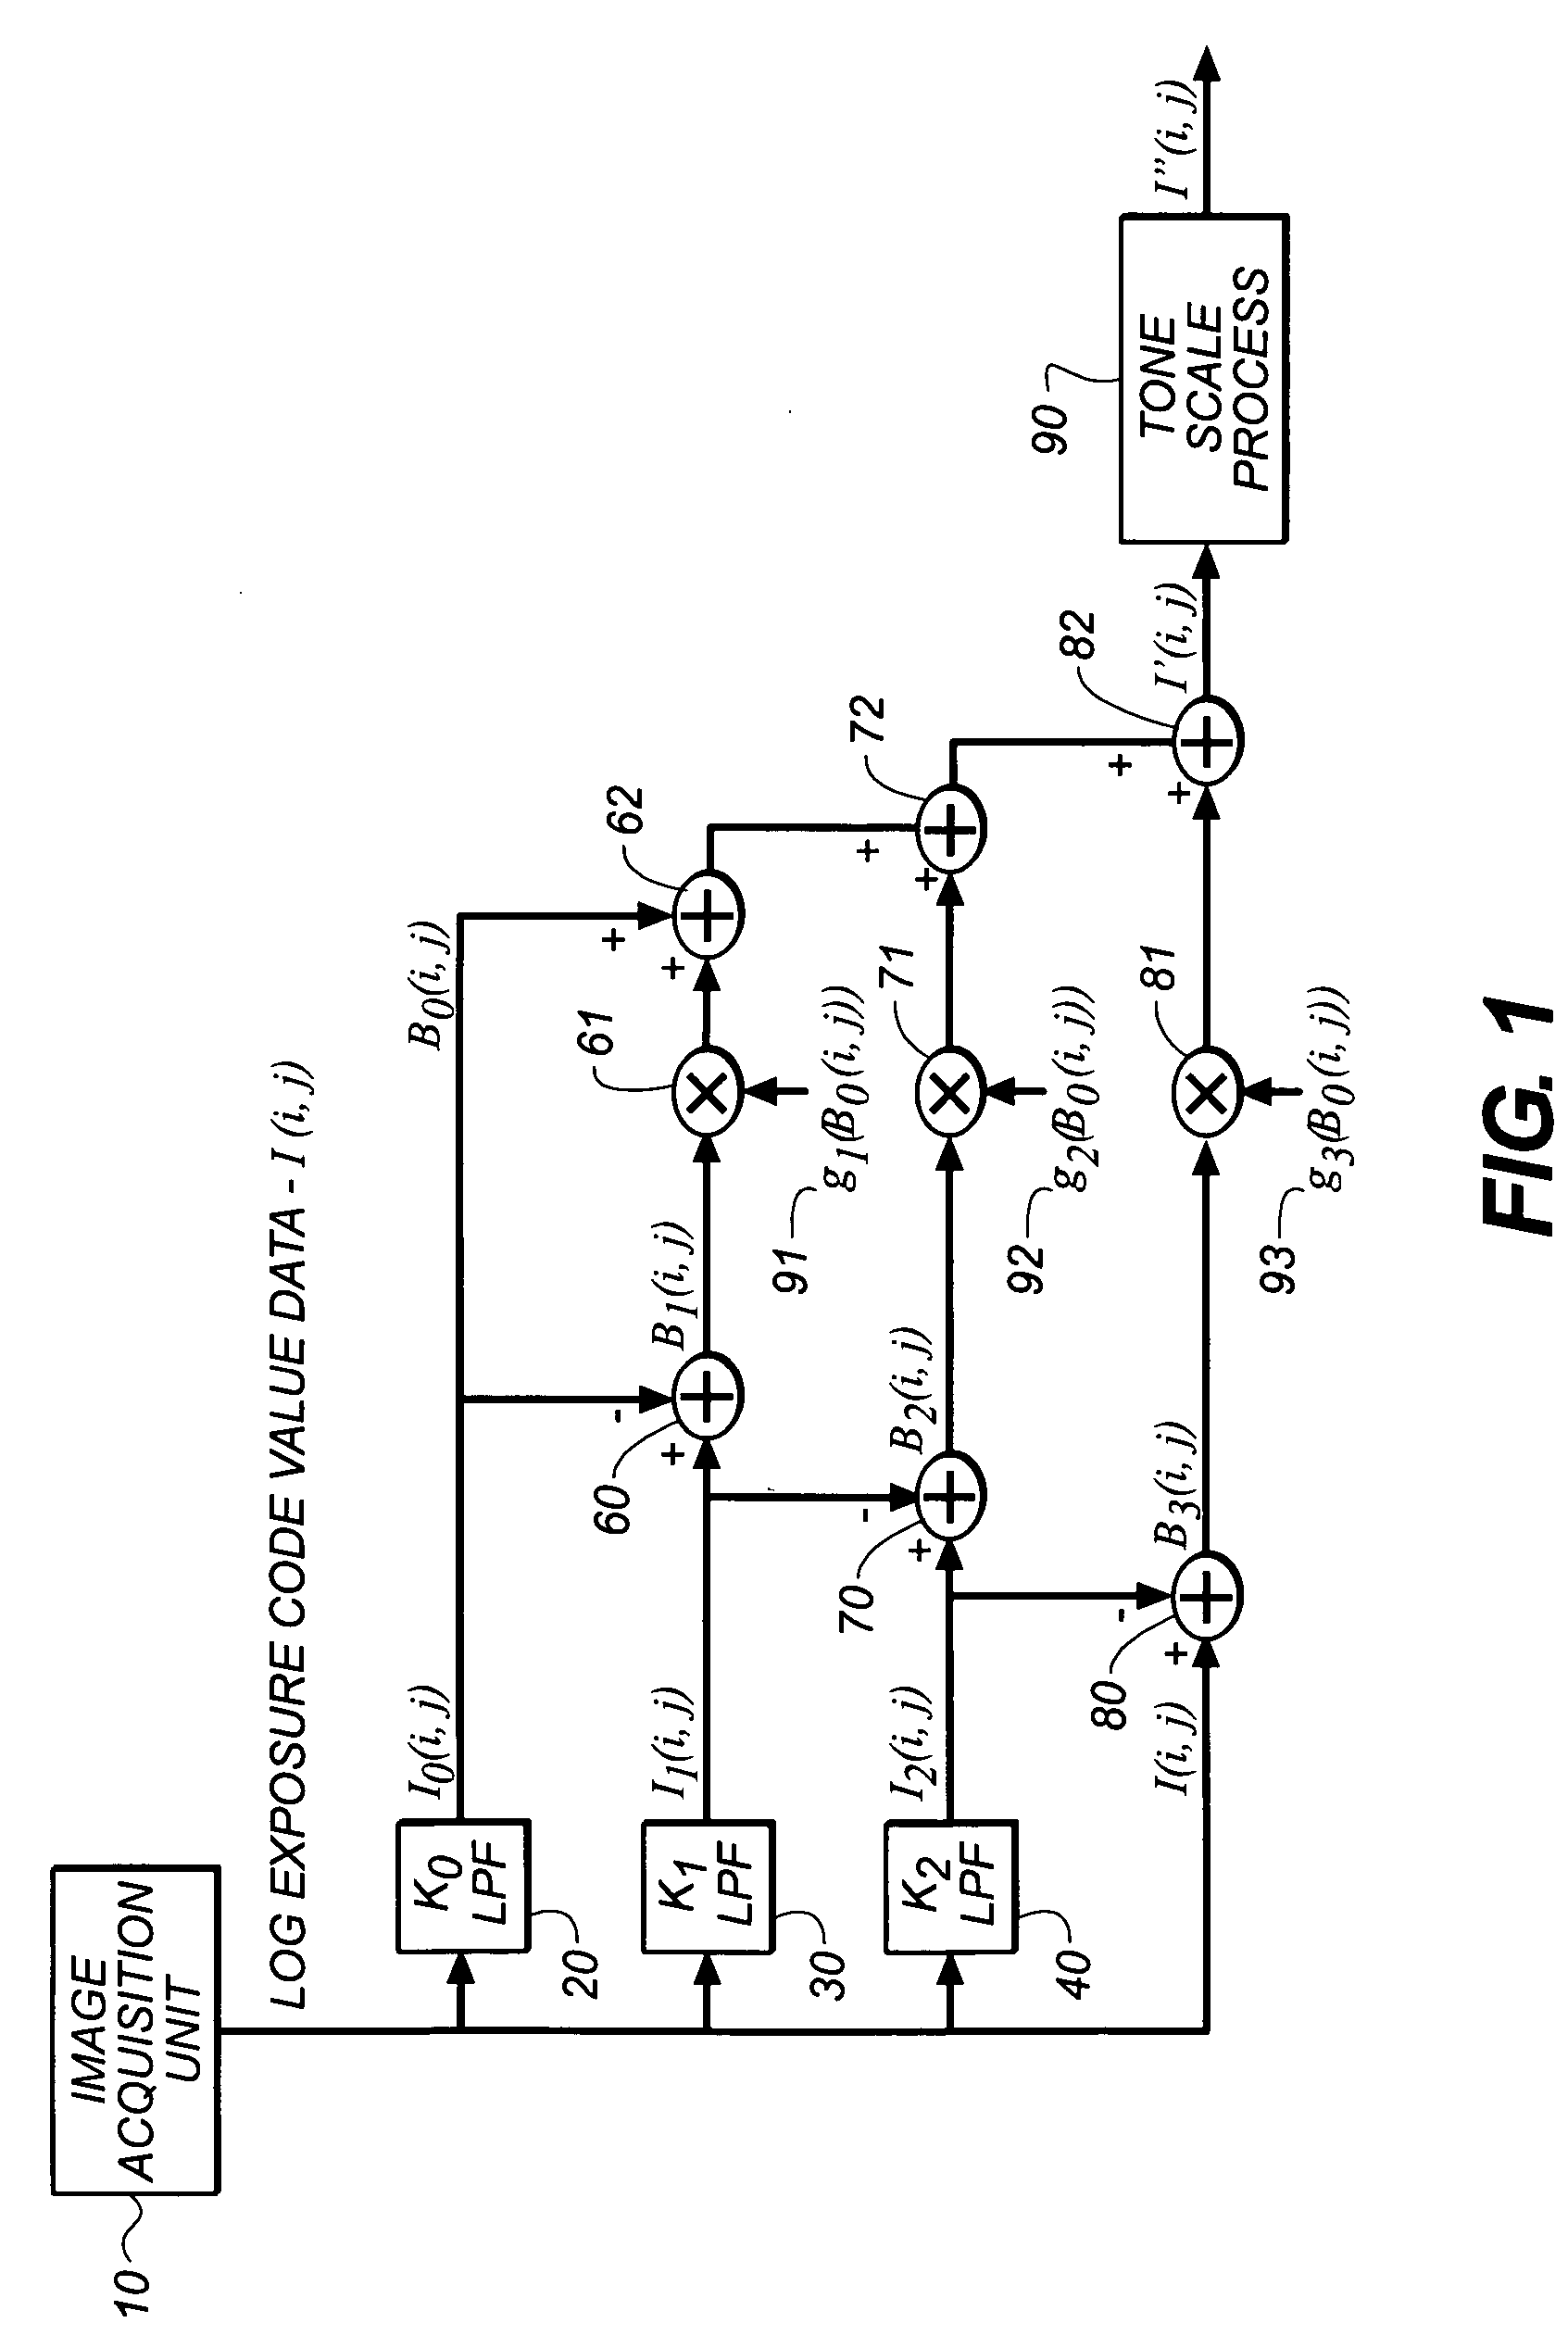 Method for rendering digital radiographic images for display based on independent control of fundamental image quality parameters